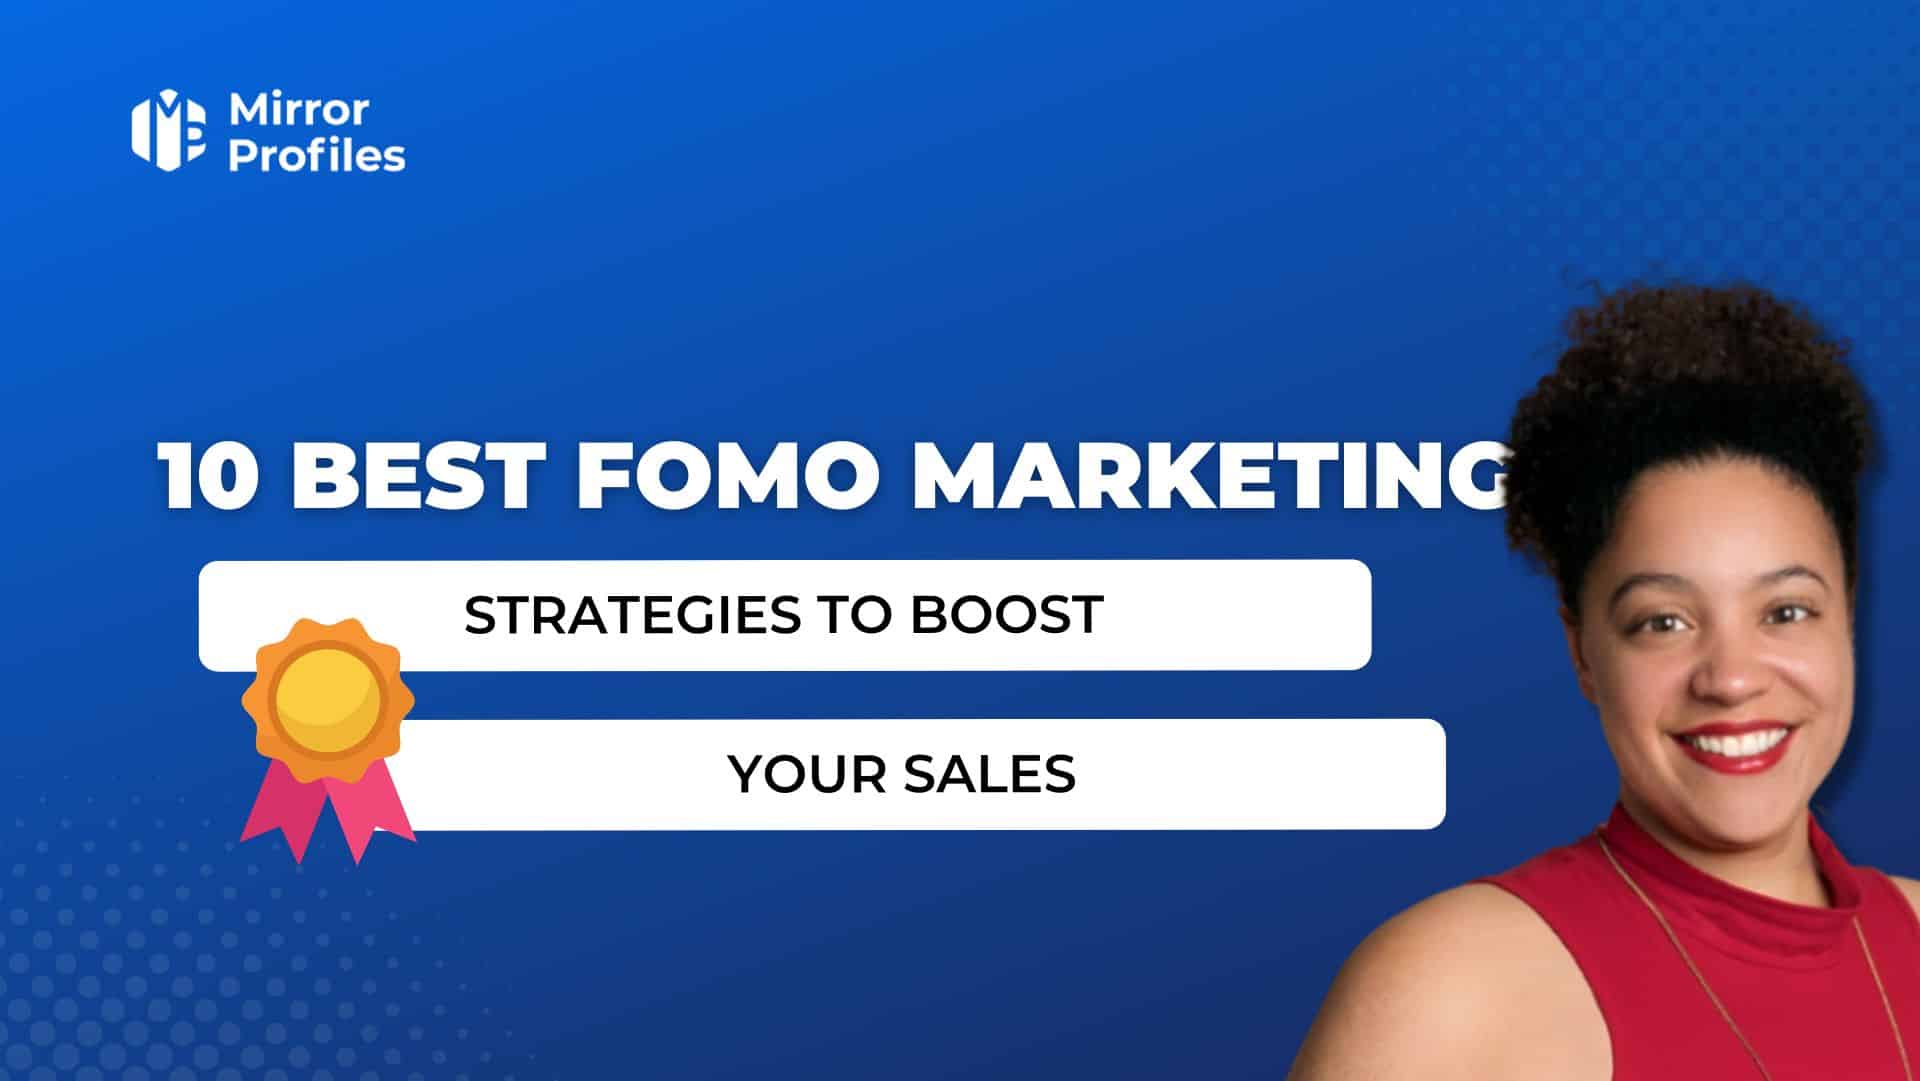 Discover the 10 best FOMO marketing strategies to increase your sales and attract more customers.